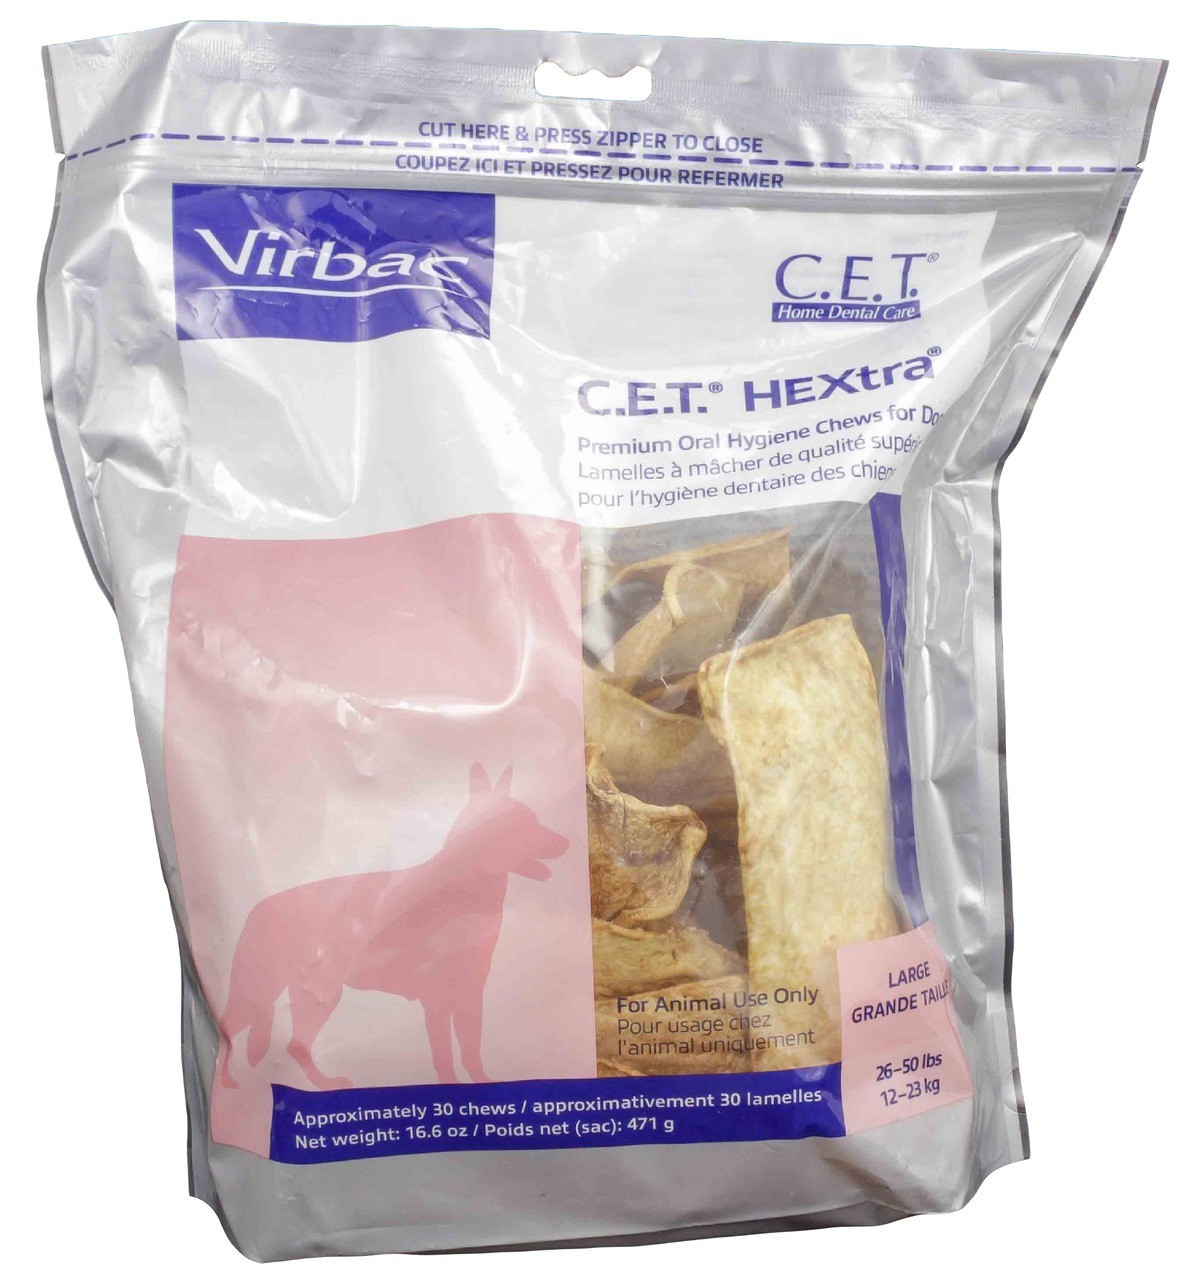 are cet dental chews safe for dogs